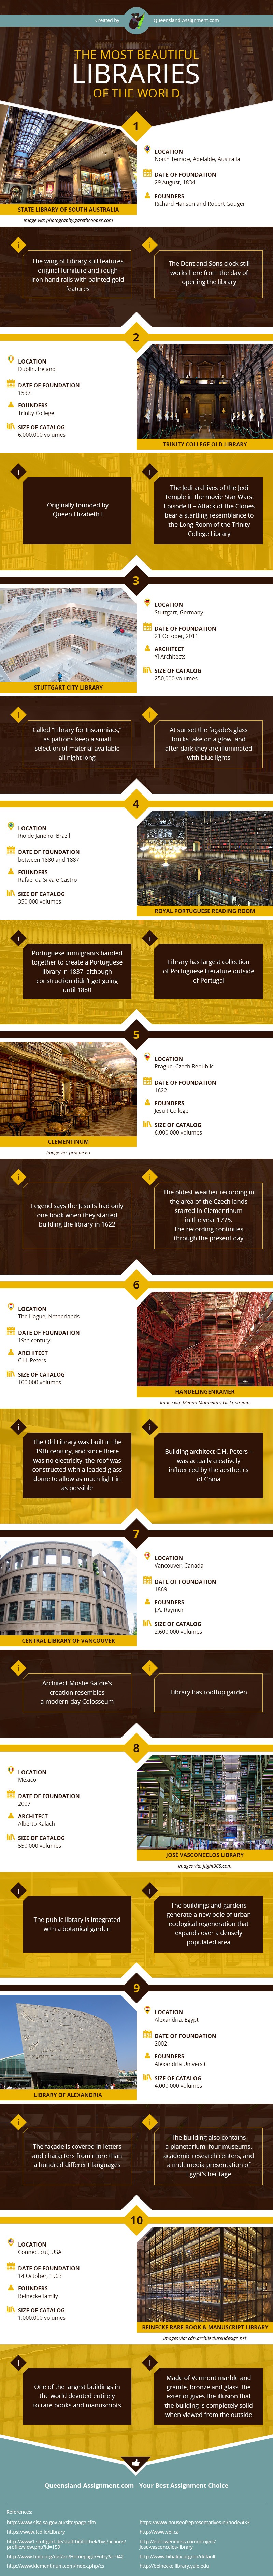 The Most Beautiful Libraries of the World Infographic